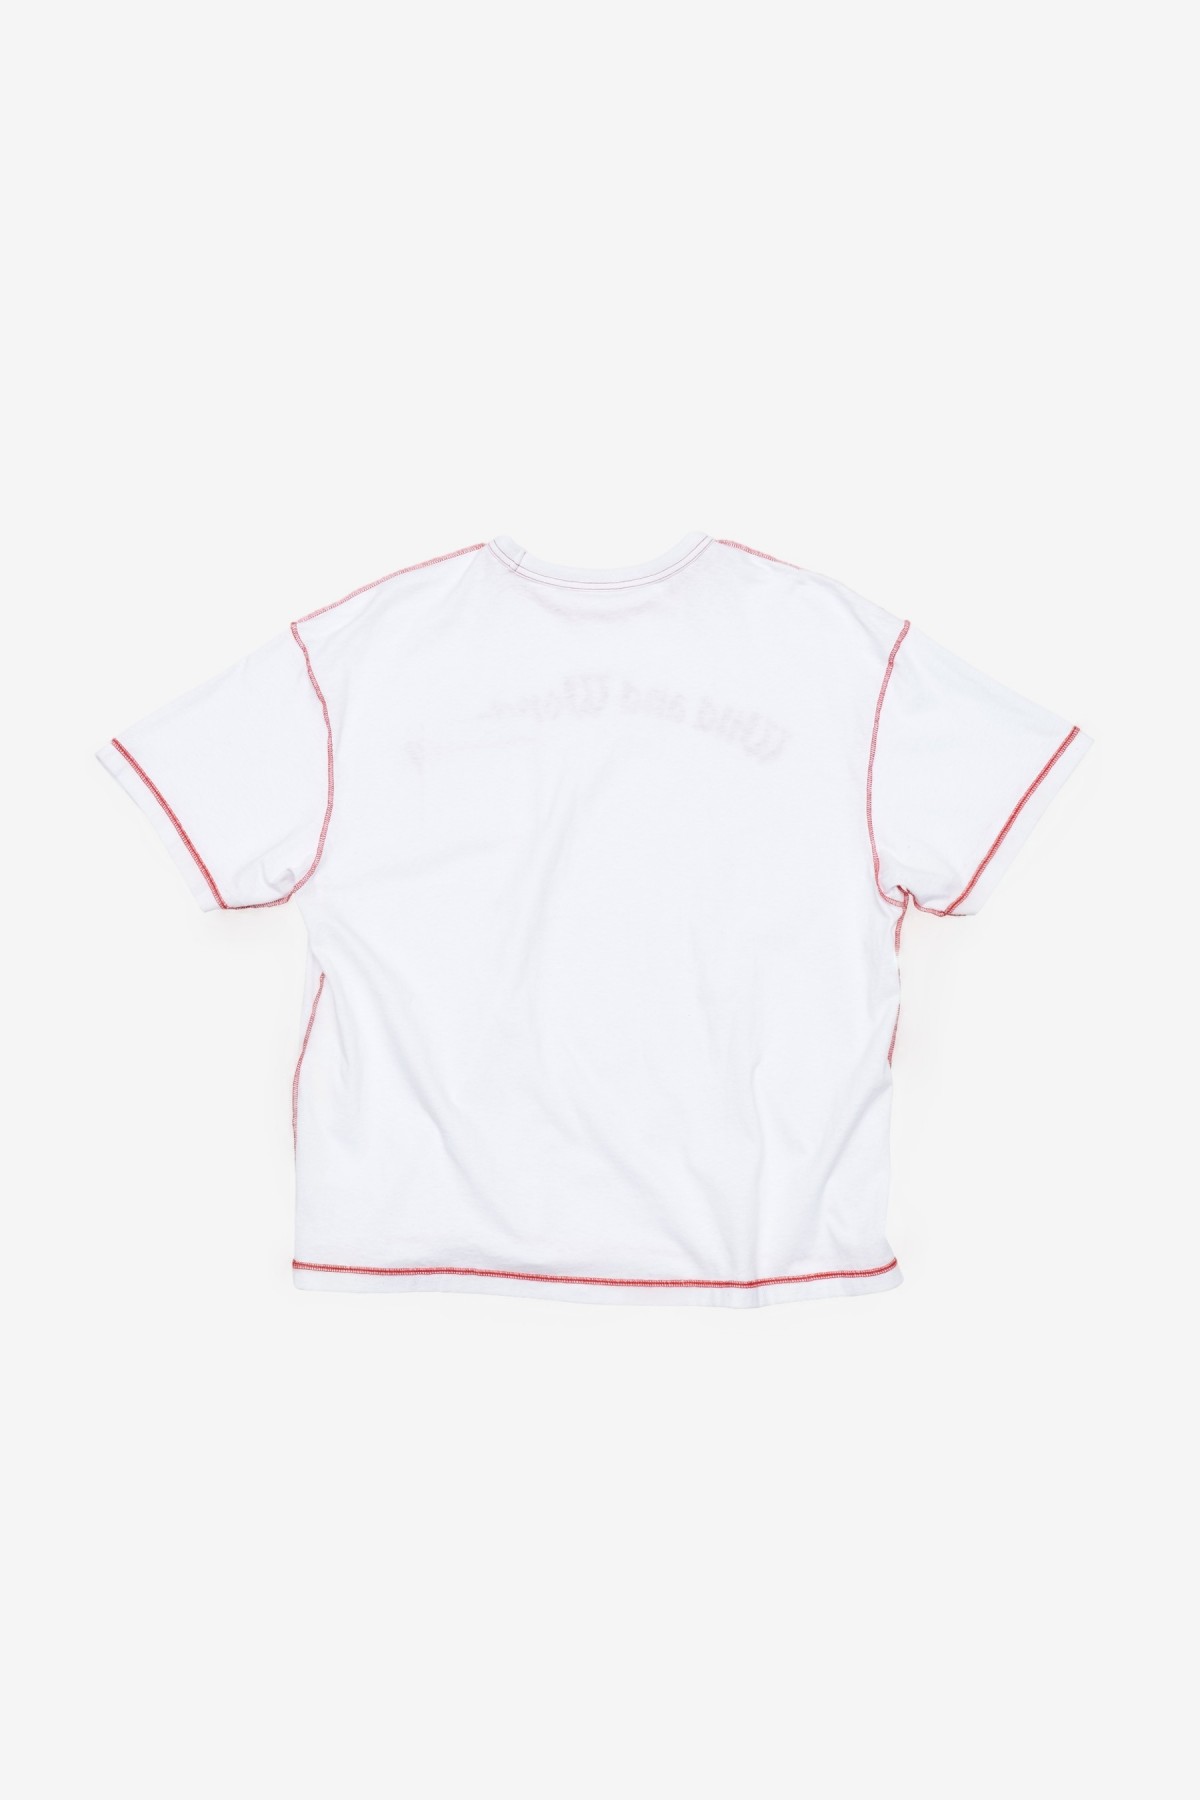 Stockholm Surfboard Club Box Tee in White